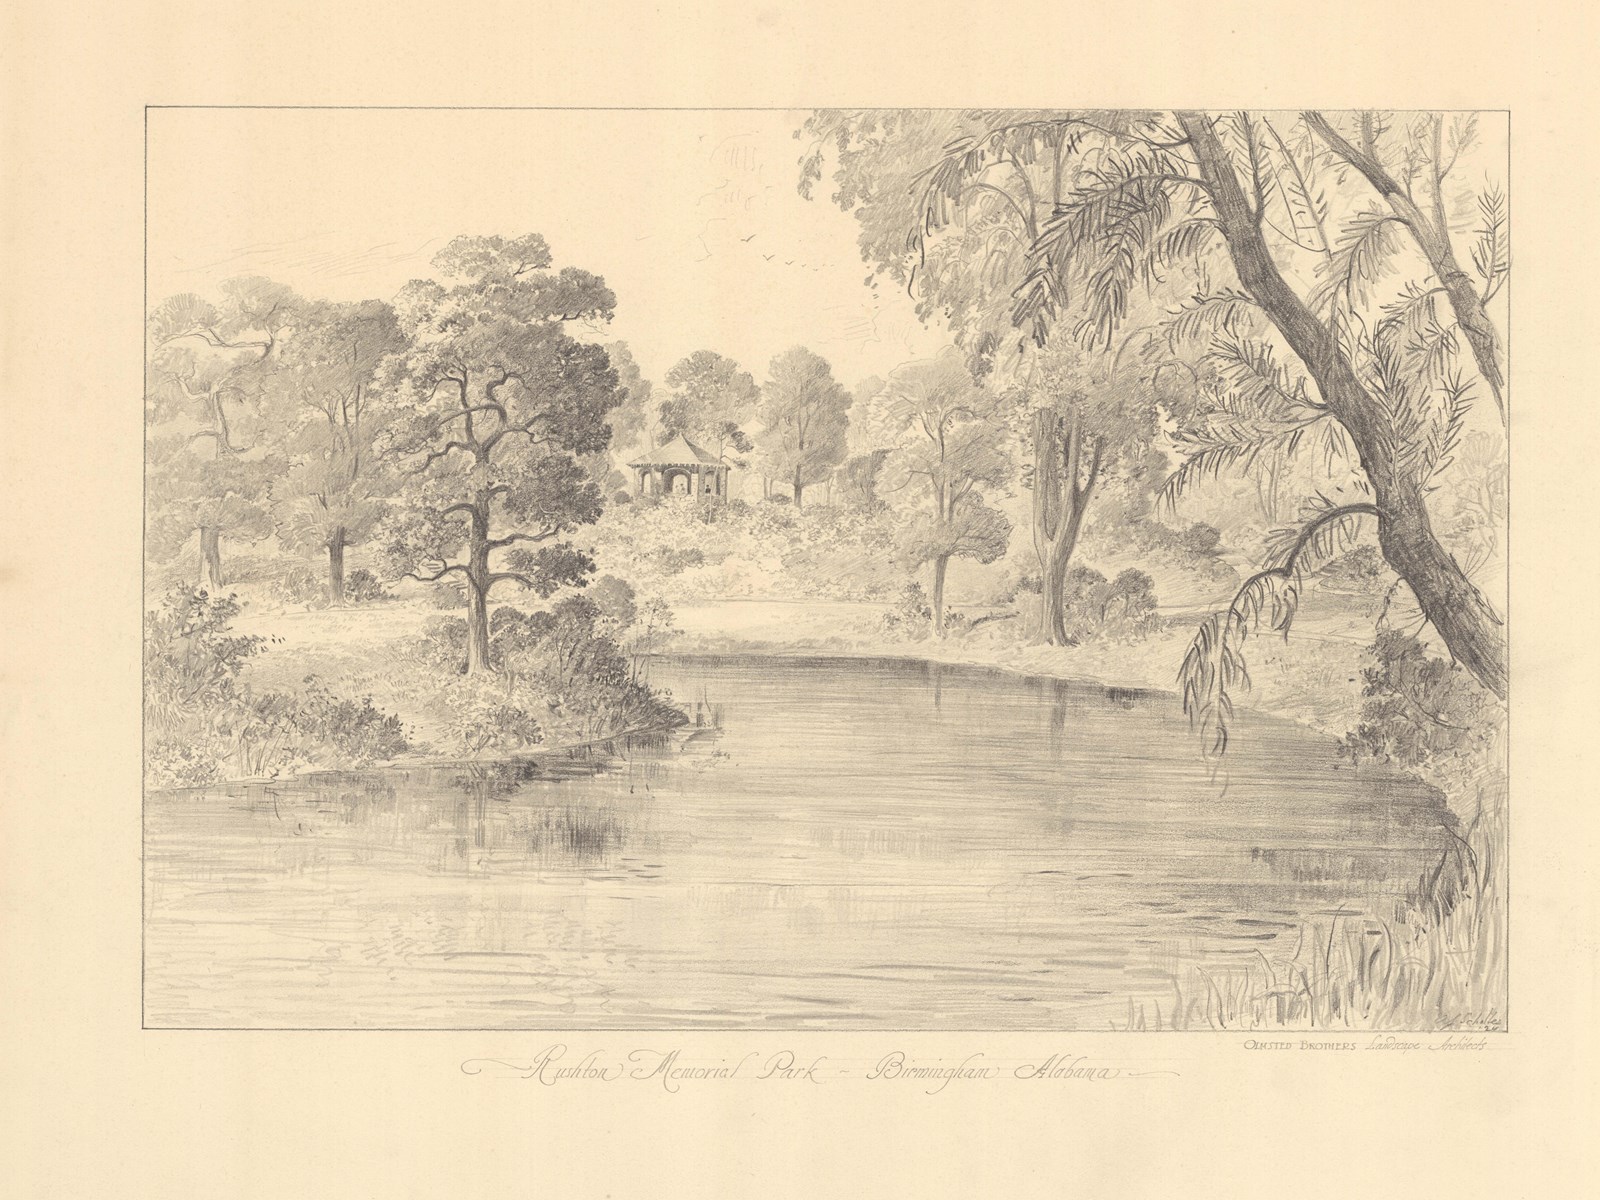 Pencil drawing of curving river lined with trees and shelter in distance